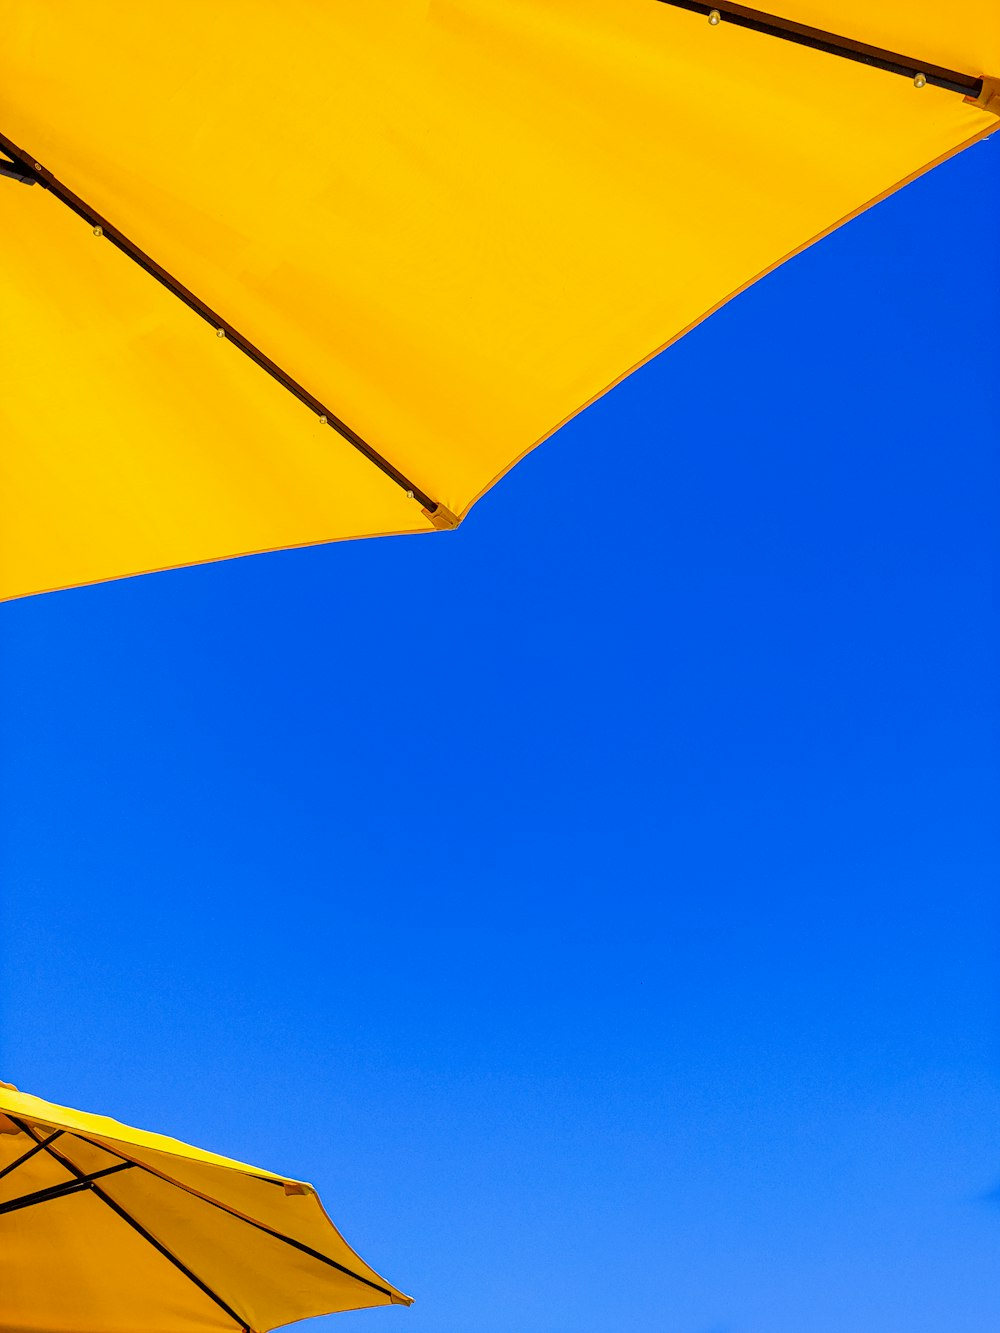 a yellow umbrella with a blue sky in the background